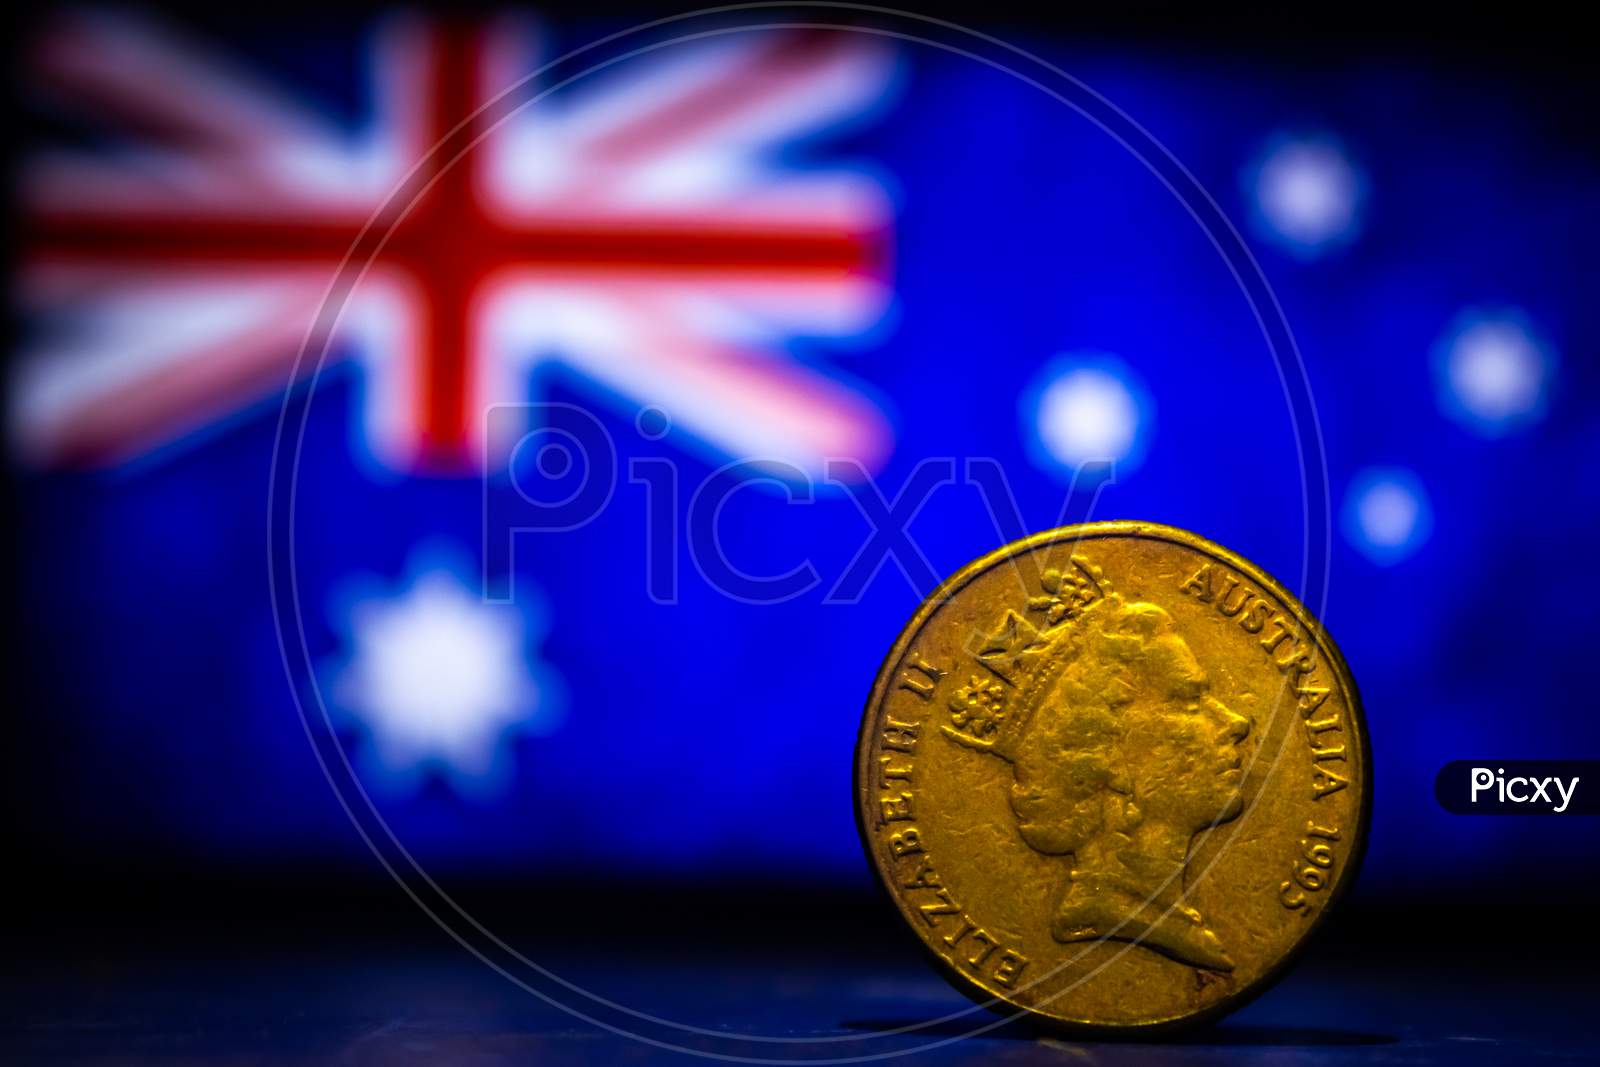 Australian Dollar Coin Isolated On Australia Flag Background With Space For Copy Text. One Dollar Coin 1995 Australian Currency. Old Coins Collection World Wide.